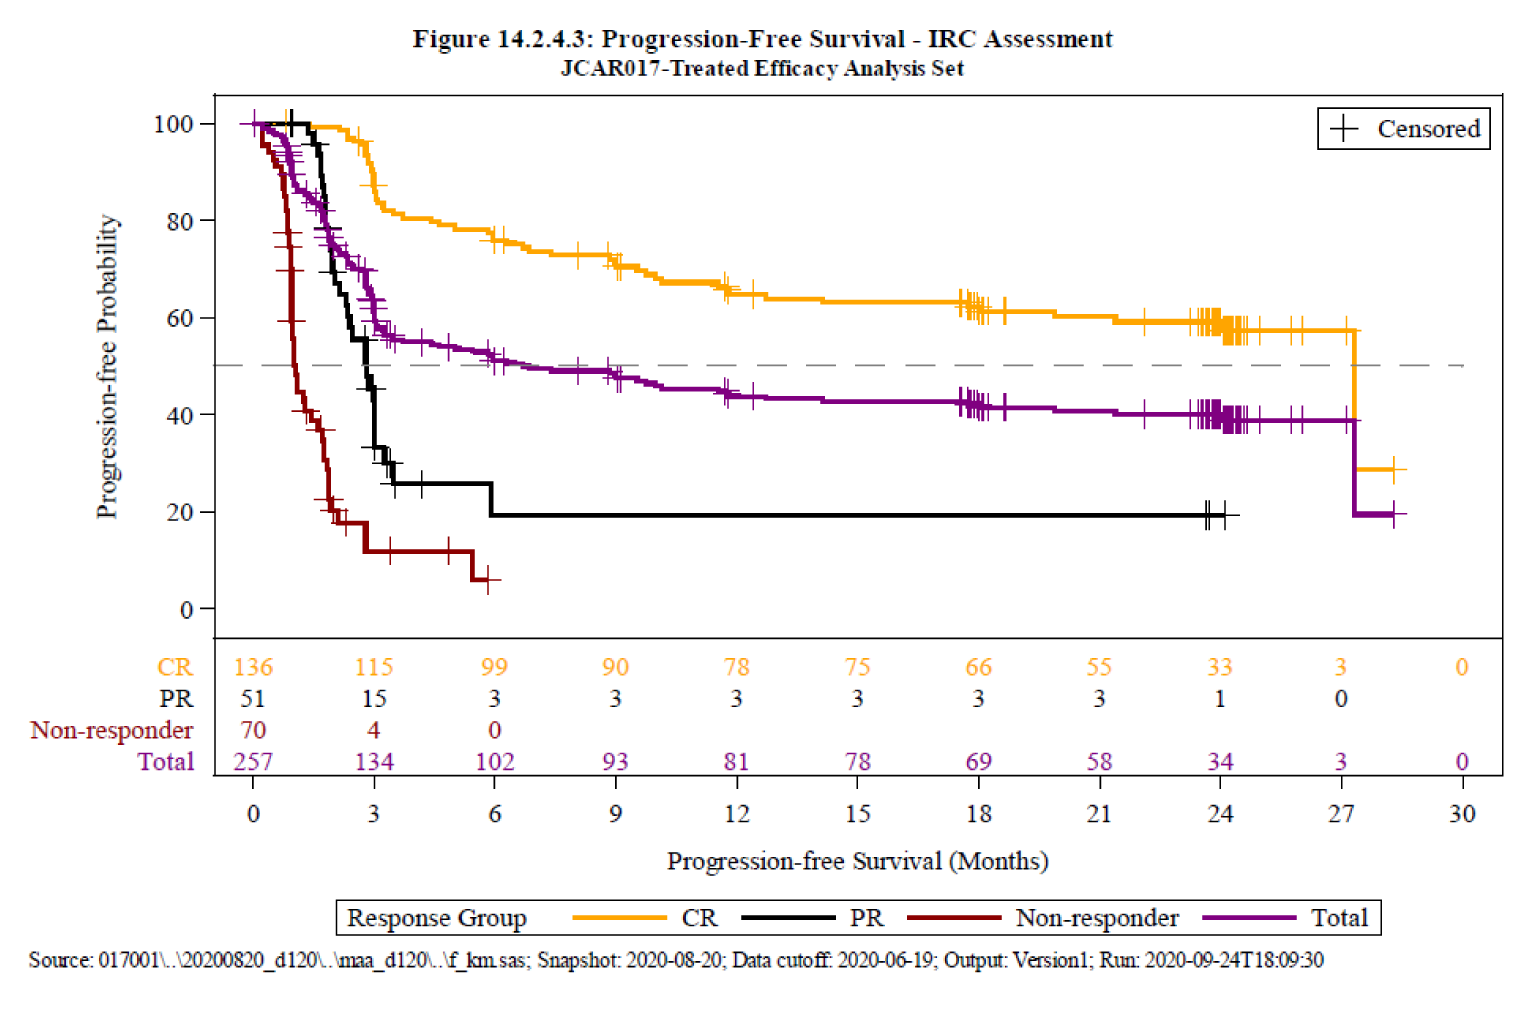 This figure depicts the progression-free survival curves in the DLBCL efficacy set, starting at 100% survival and reaching 50% between 2, 3, 7, and 27 months for the non-responder, partial response, total, and complete response groups, respectively.